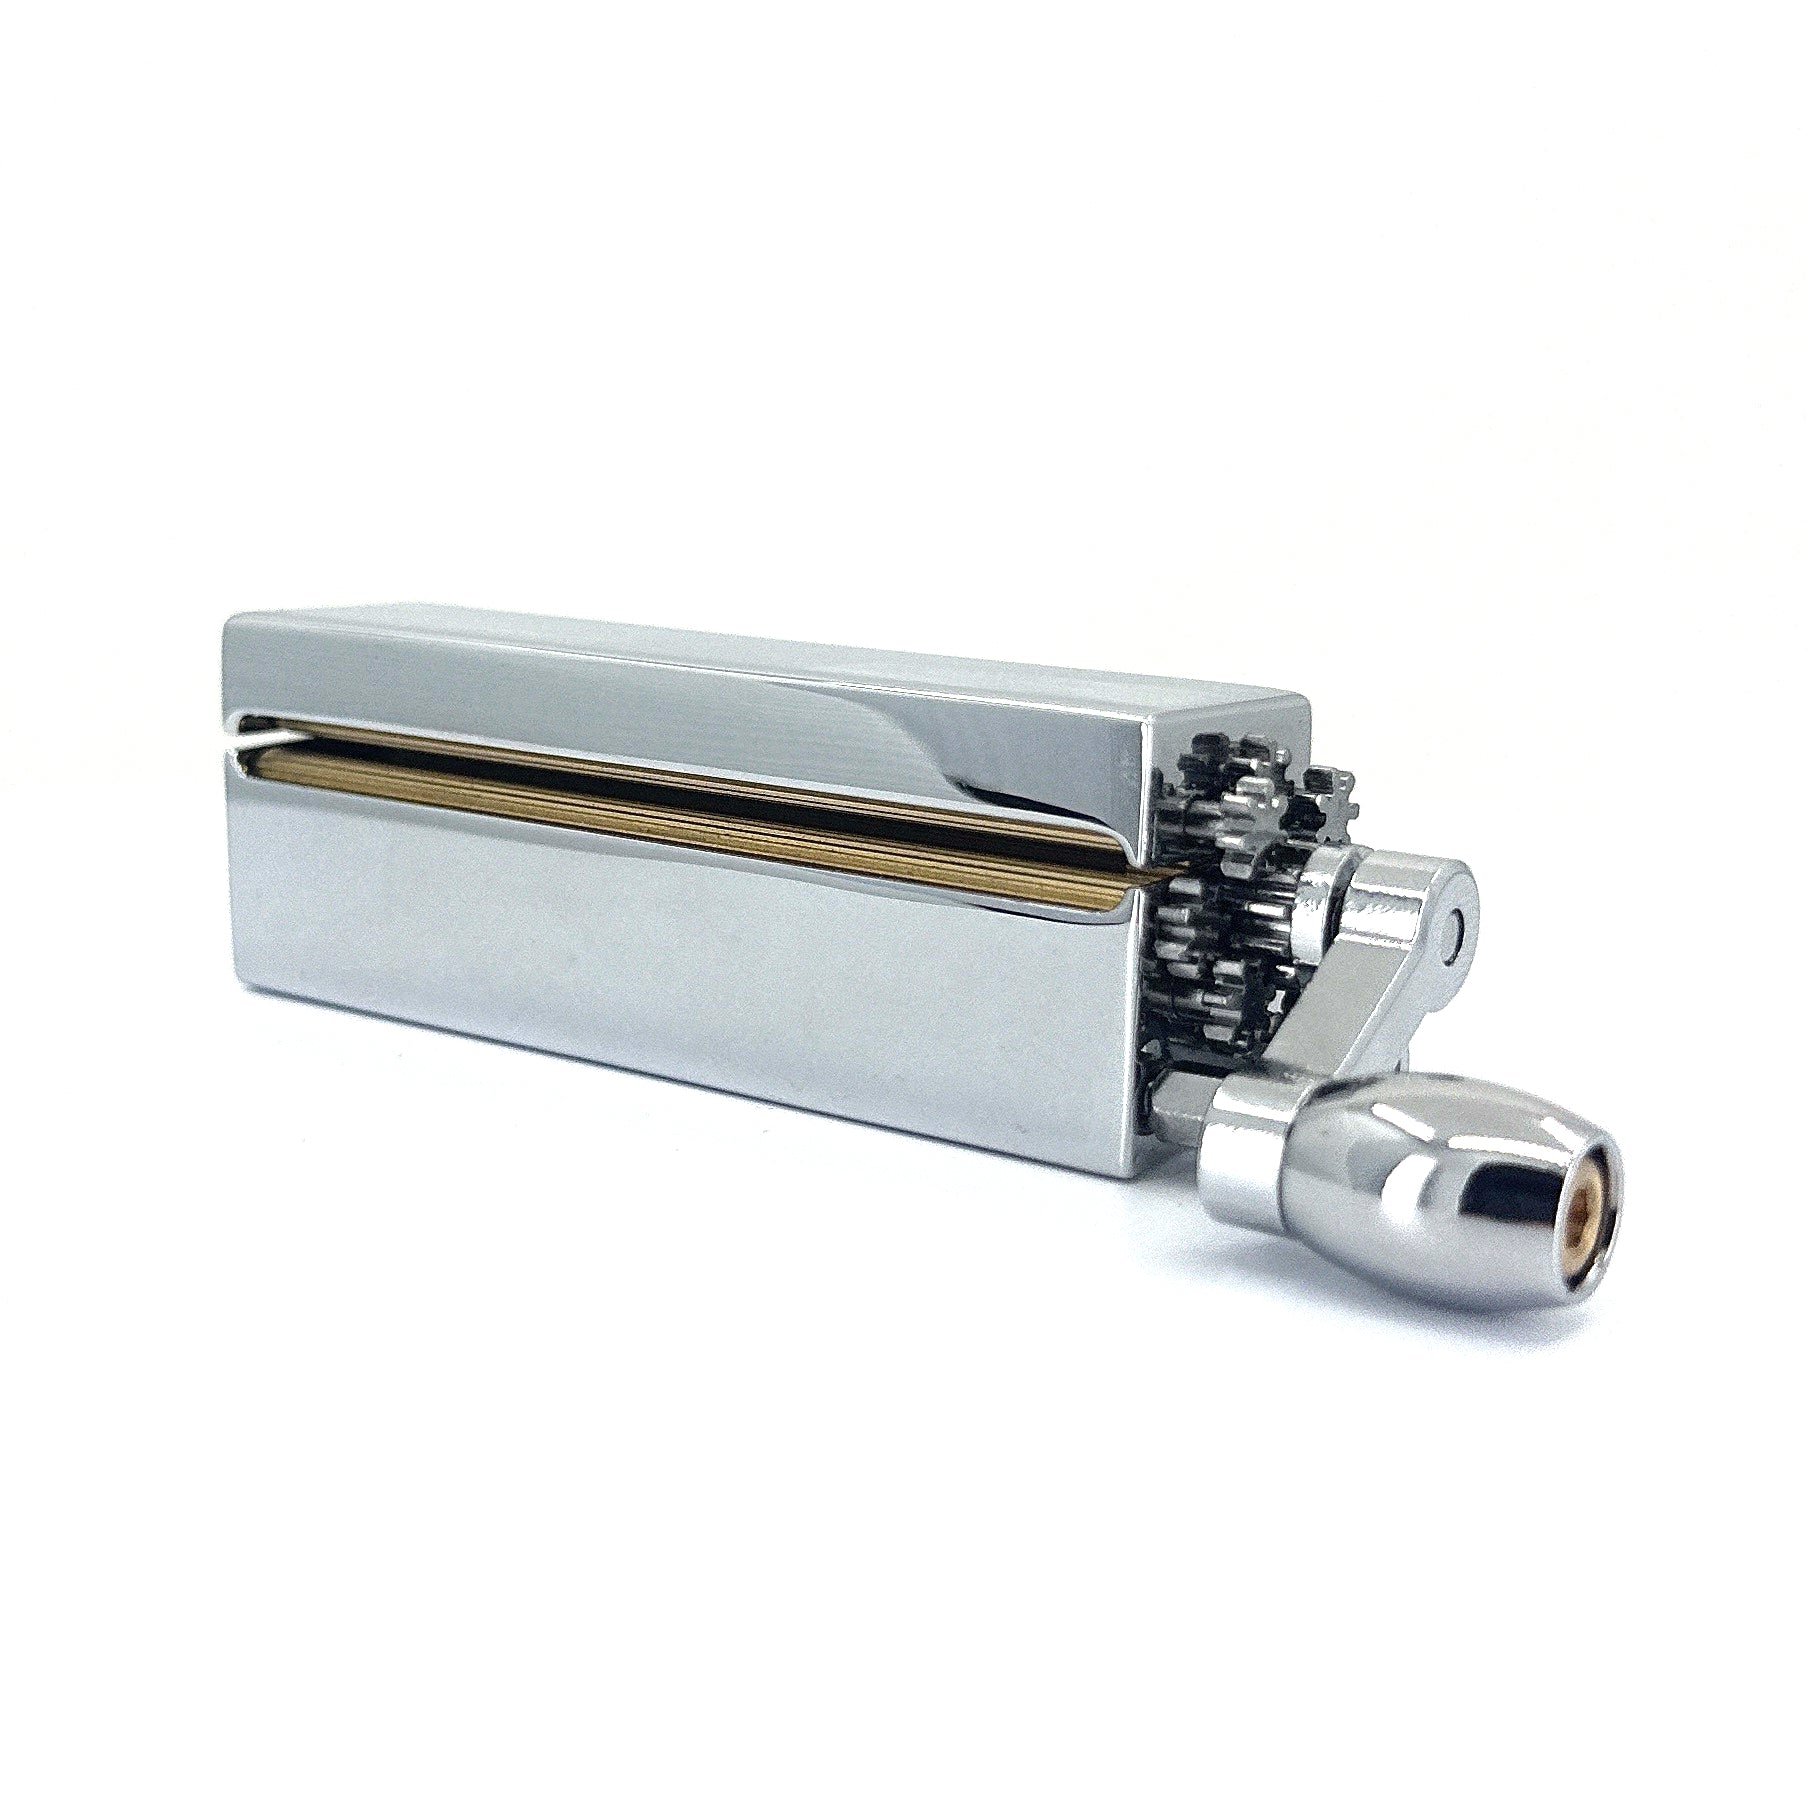 Joint roller chrome huey manual cigarette rolling machine.